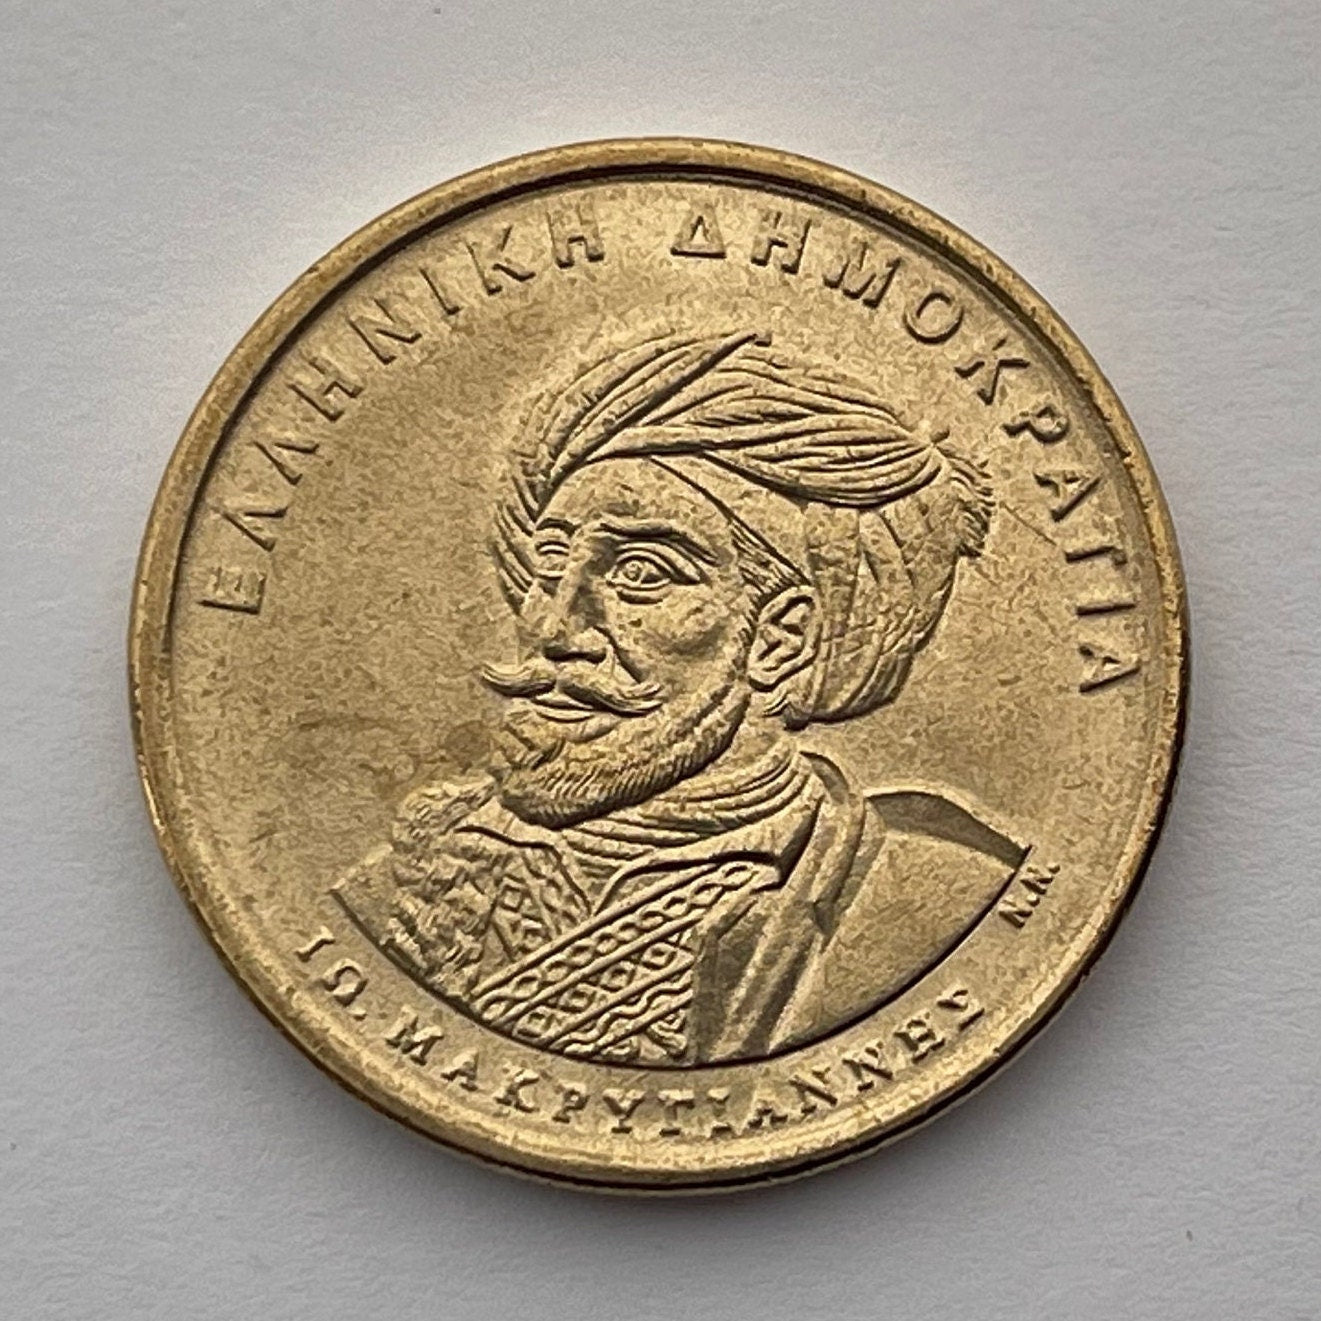 Revolutionary General Makriyannis & Parliament Building 50 Drachmes Greece Authentic Coin Money for Jewelry (Constitution) (1994)